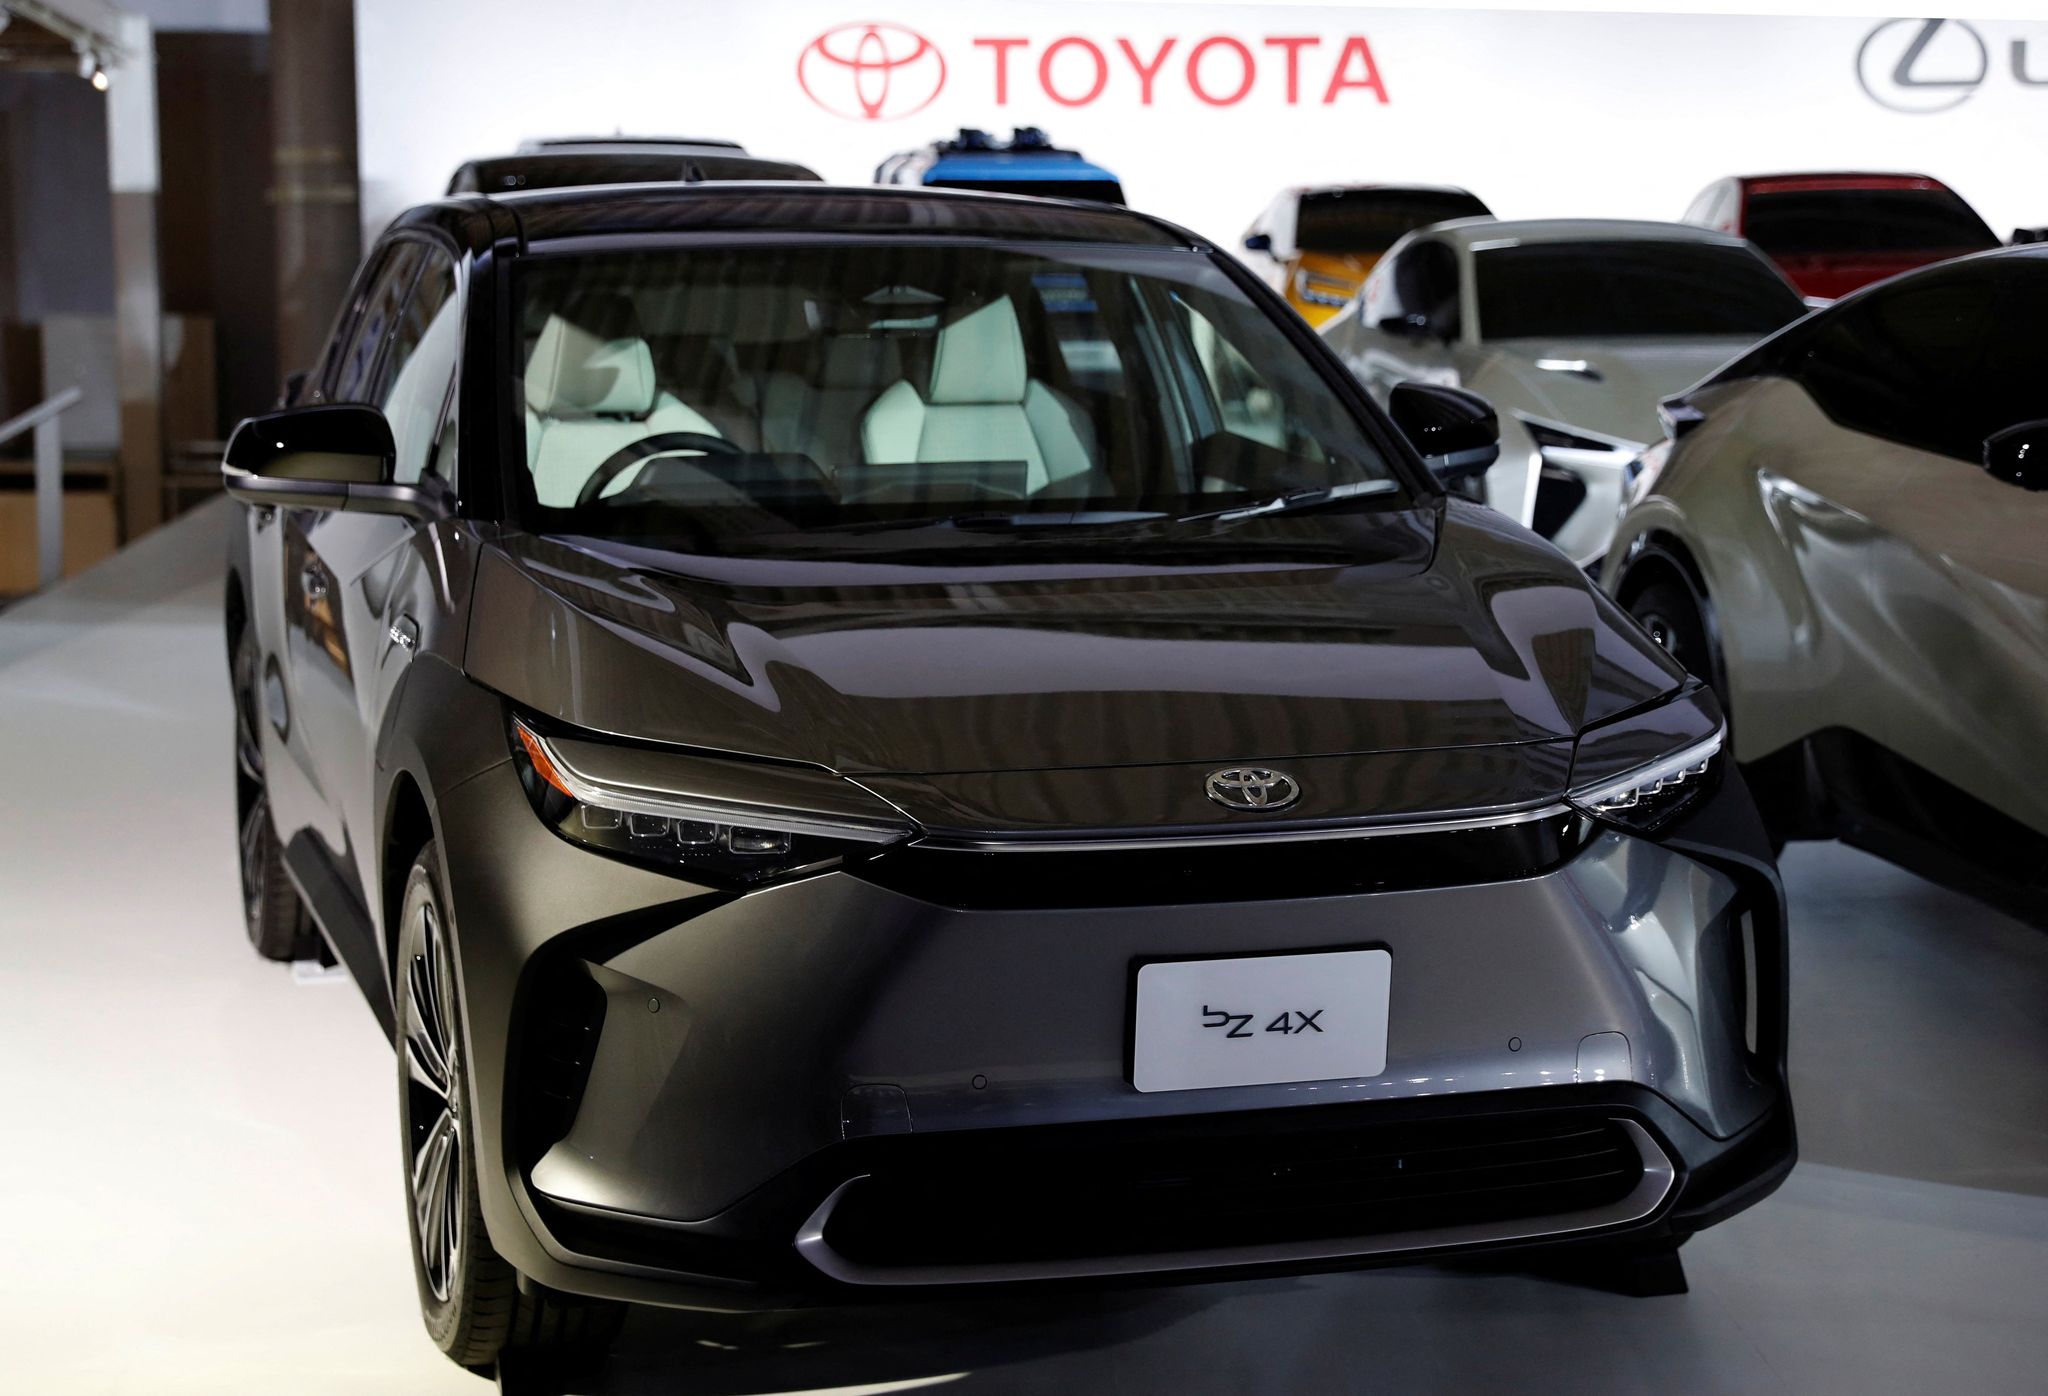 Toyota Motor Corporation's bZ 4X is pictured after a briefing on the company's strategies on battery EVs in Tokyo, Japan, December 14, 2021. Photo: Reuters